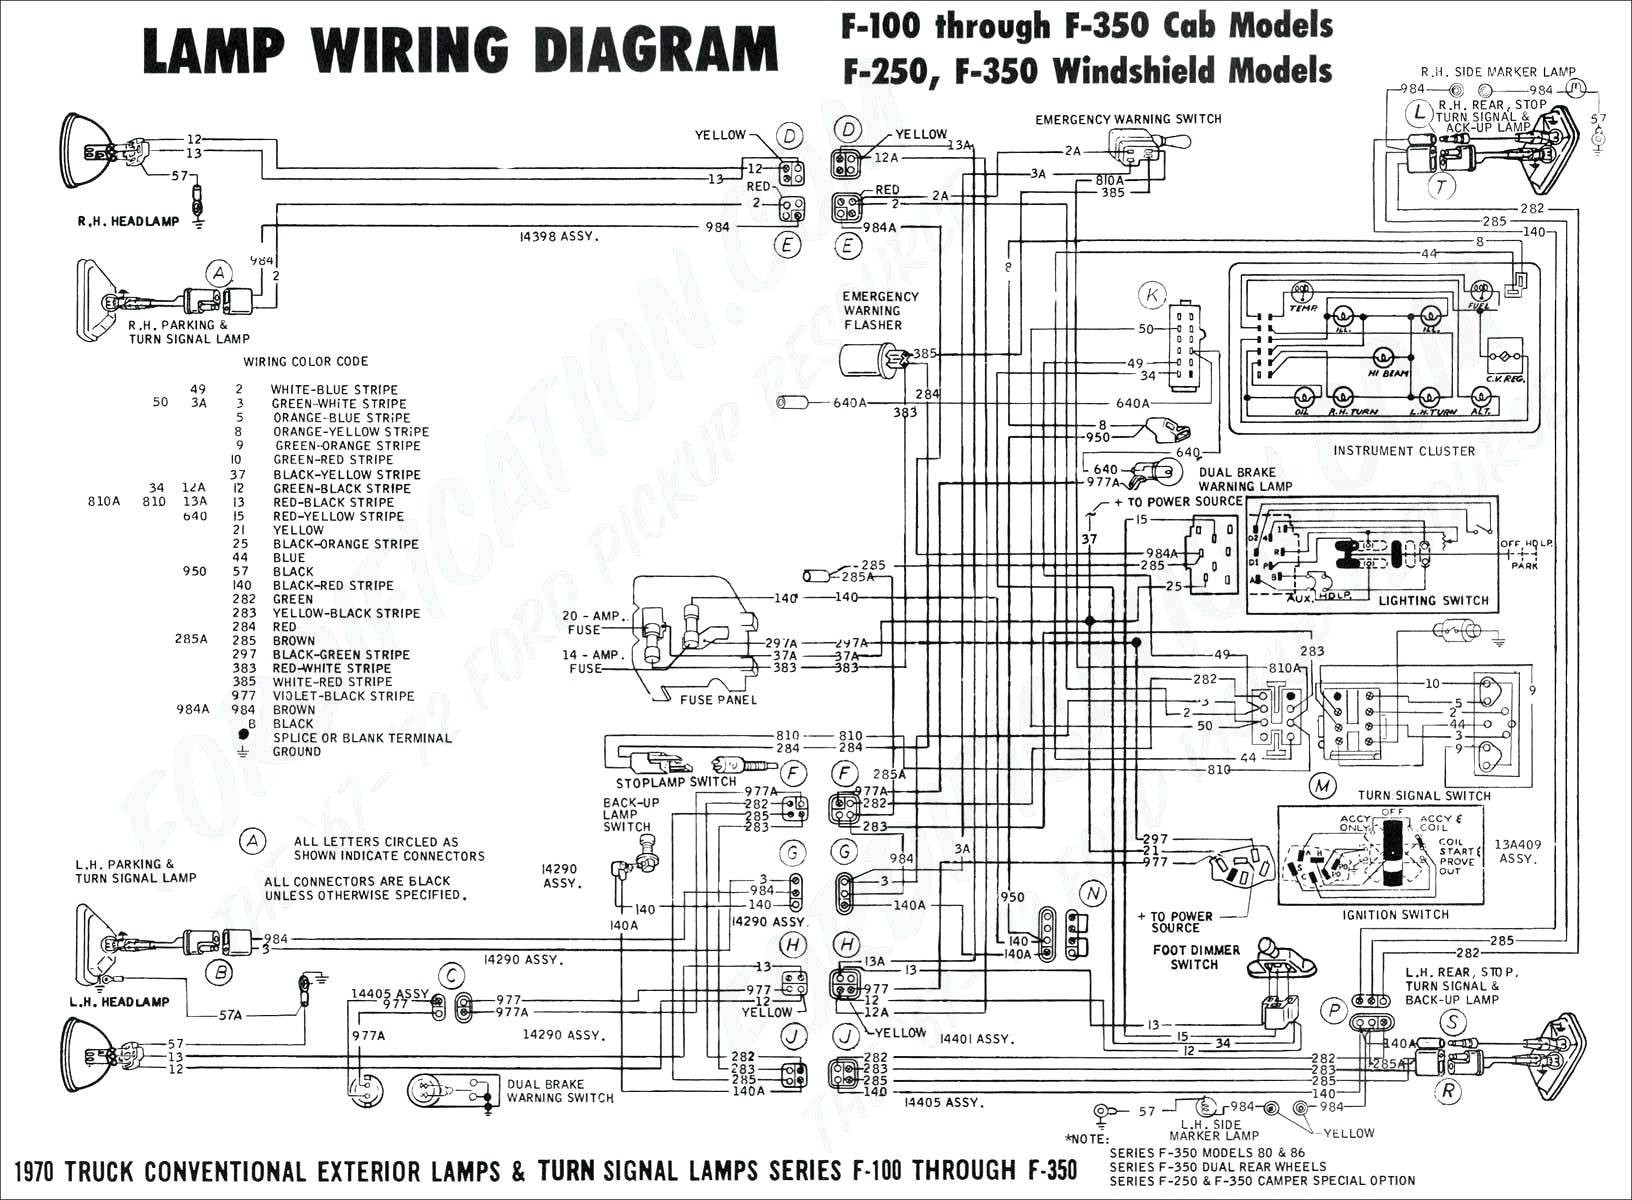 2010 ford Fusion Engine Diagram 2007 ford Edge Wiring Diagram Wiring Diagram Paper Of 2010 ford Fusion Engine Diagram